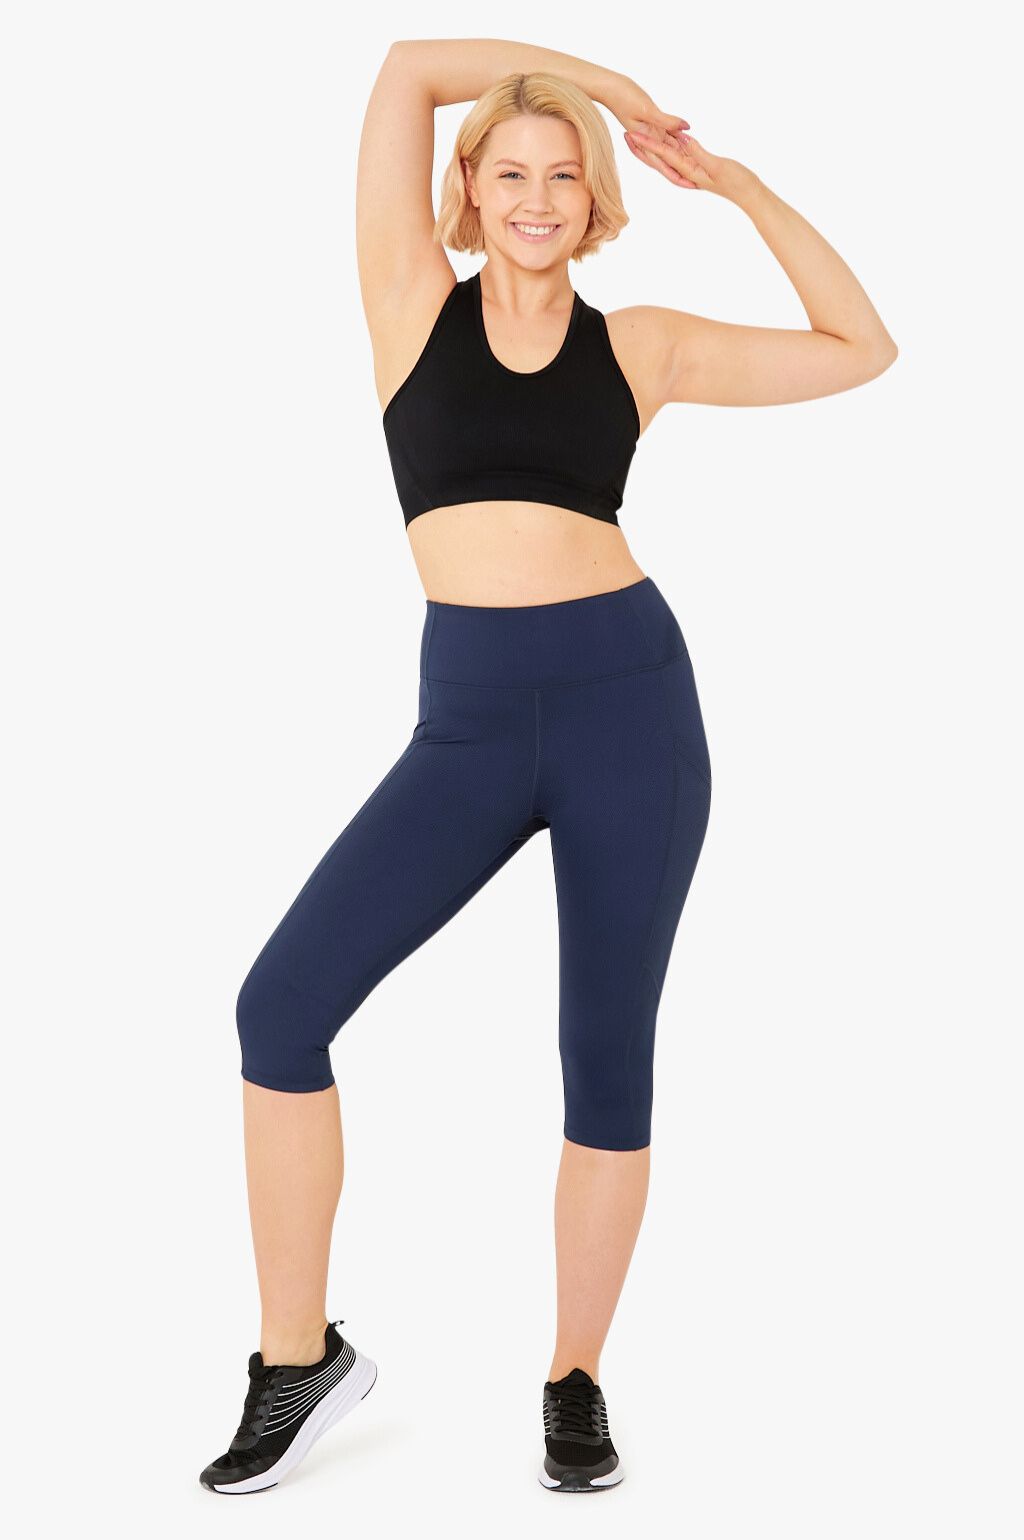 Cut Out Top And Push Up Legging Gym Set - Buy Fashion Wholesale in The UK